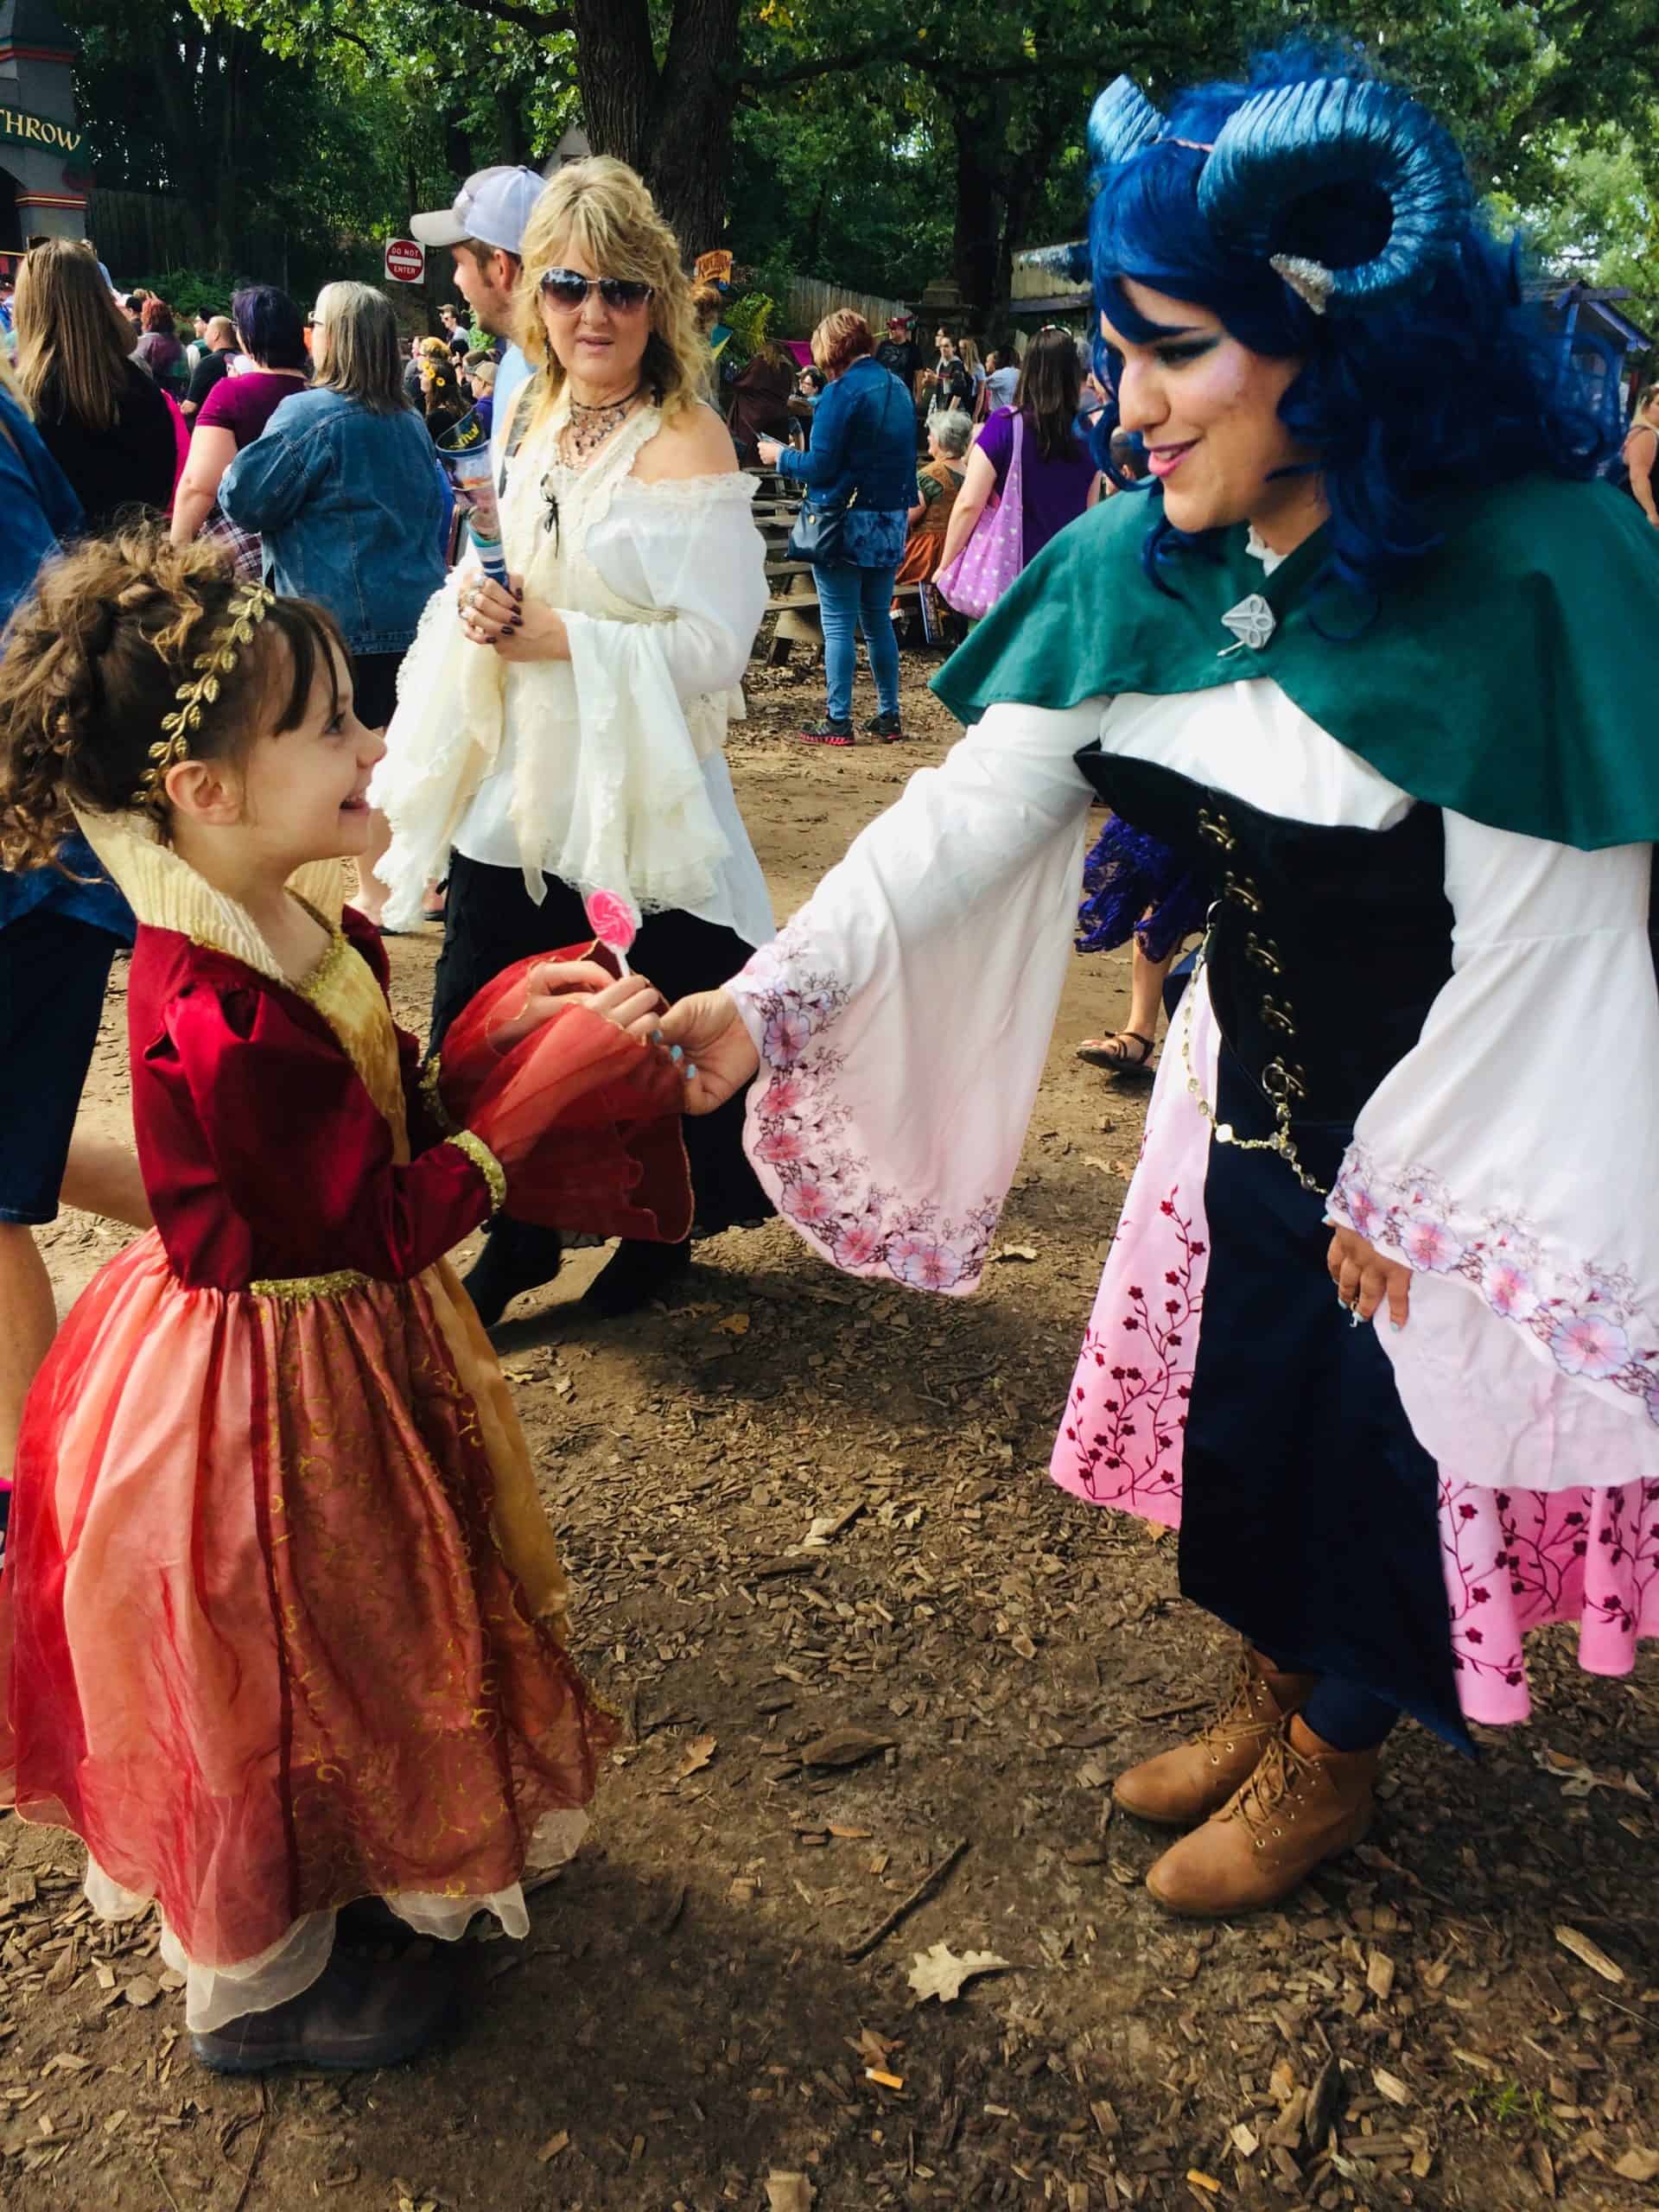 Best things to do in Minneapolis Minnesota Jeremy Hance - his daughter meets one of her cosplay heros at Minnesota Renaissance Festival